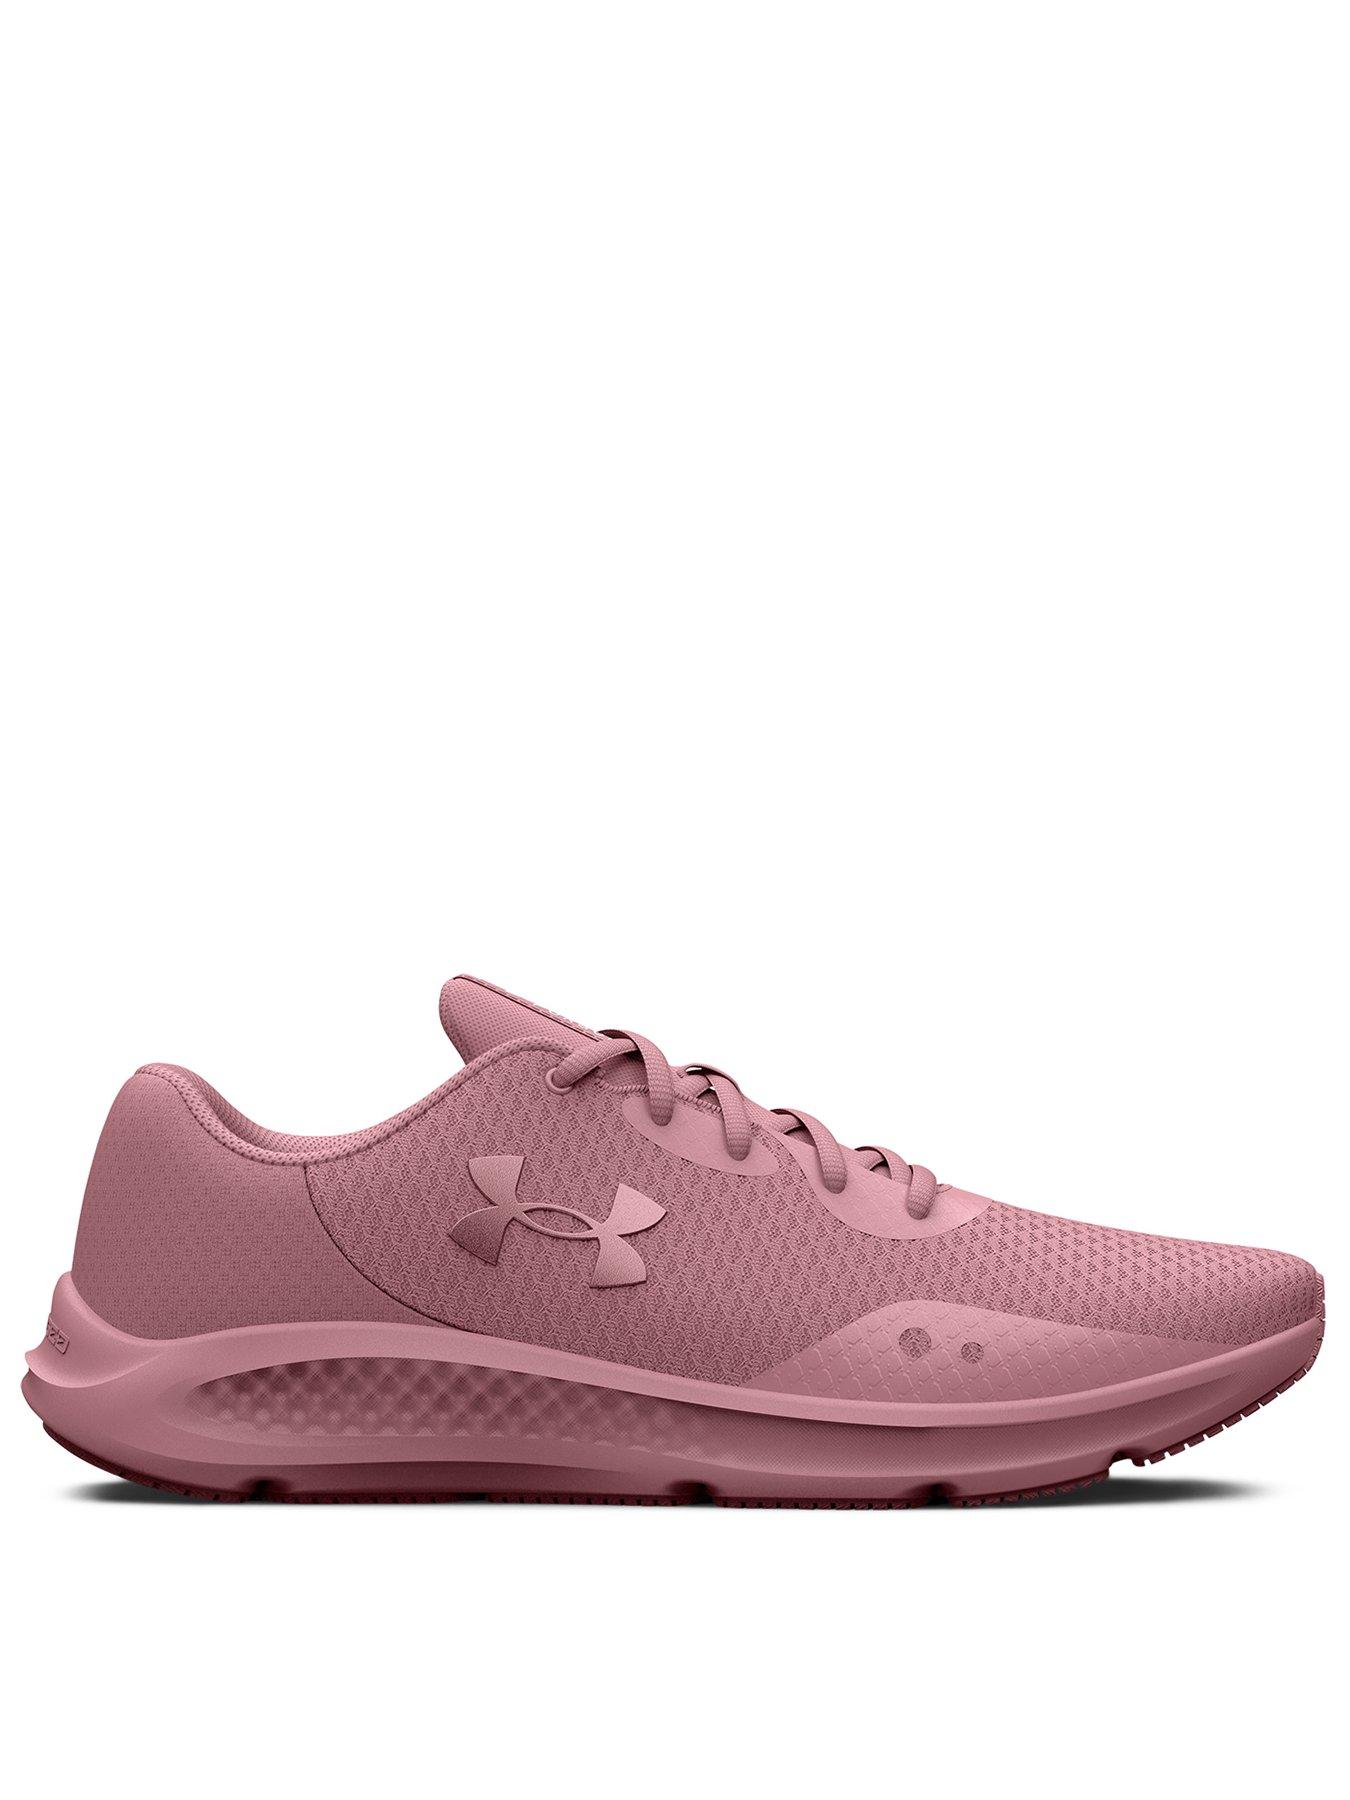 Under Armour Women's UA Surge 3 Running Shoes, UNBOXING